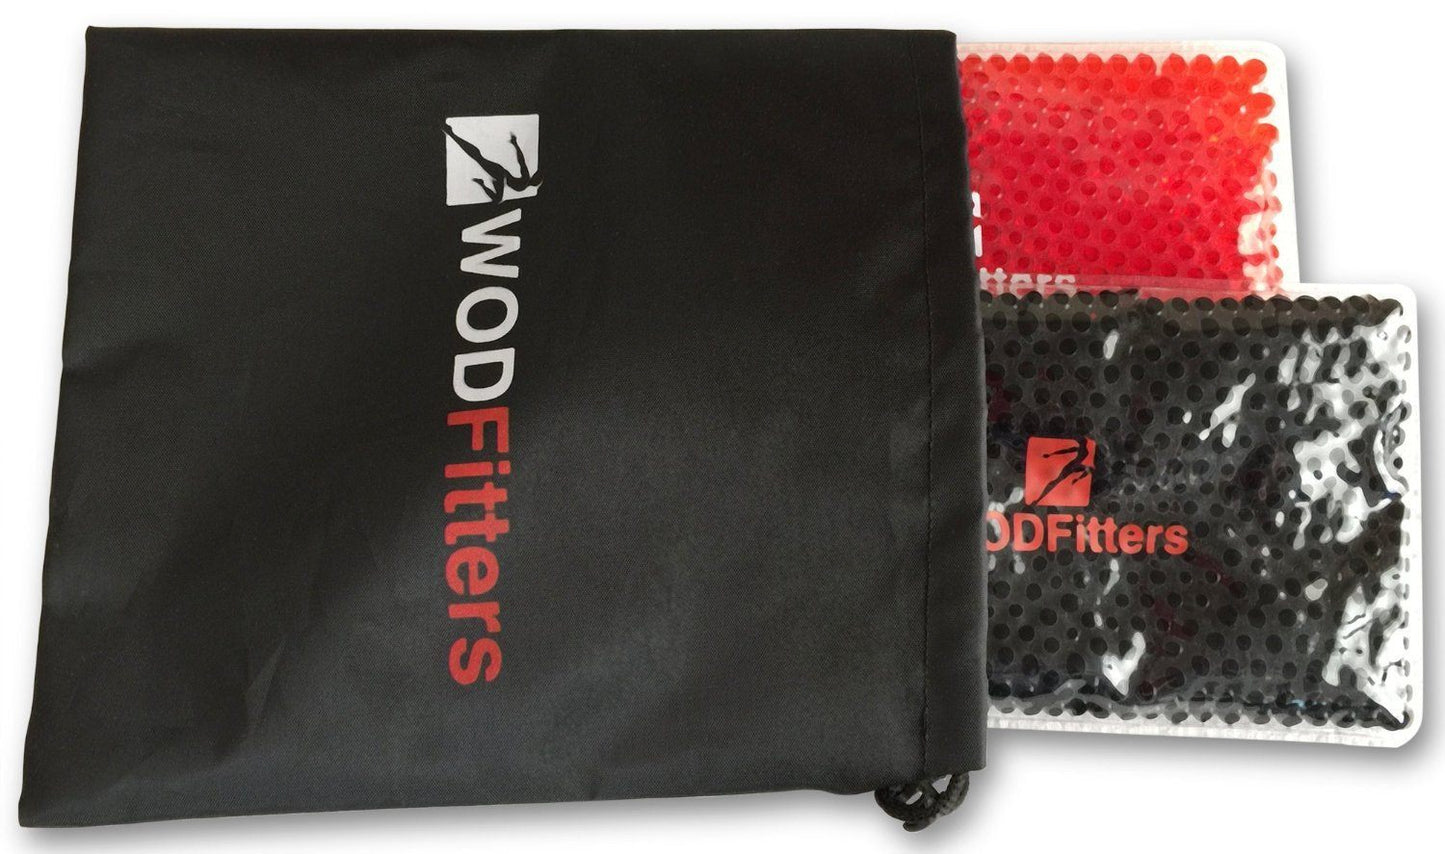 WODFitters Recovery Hot and Cold Pack 